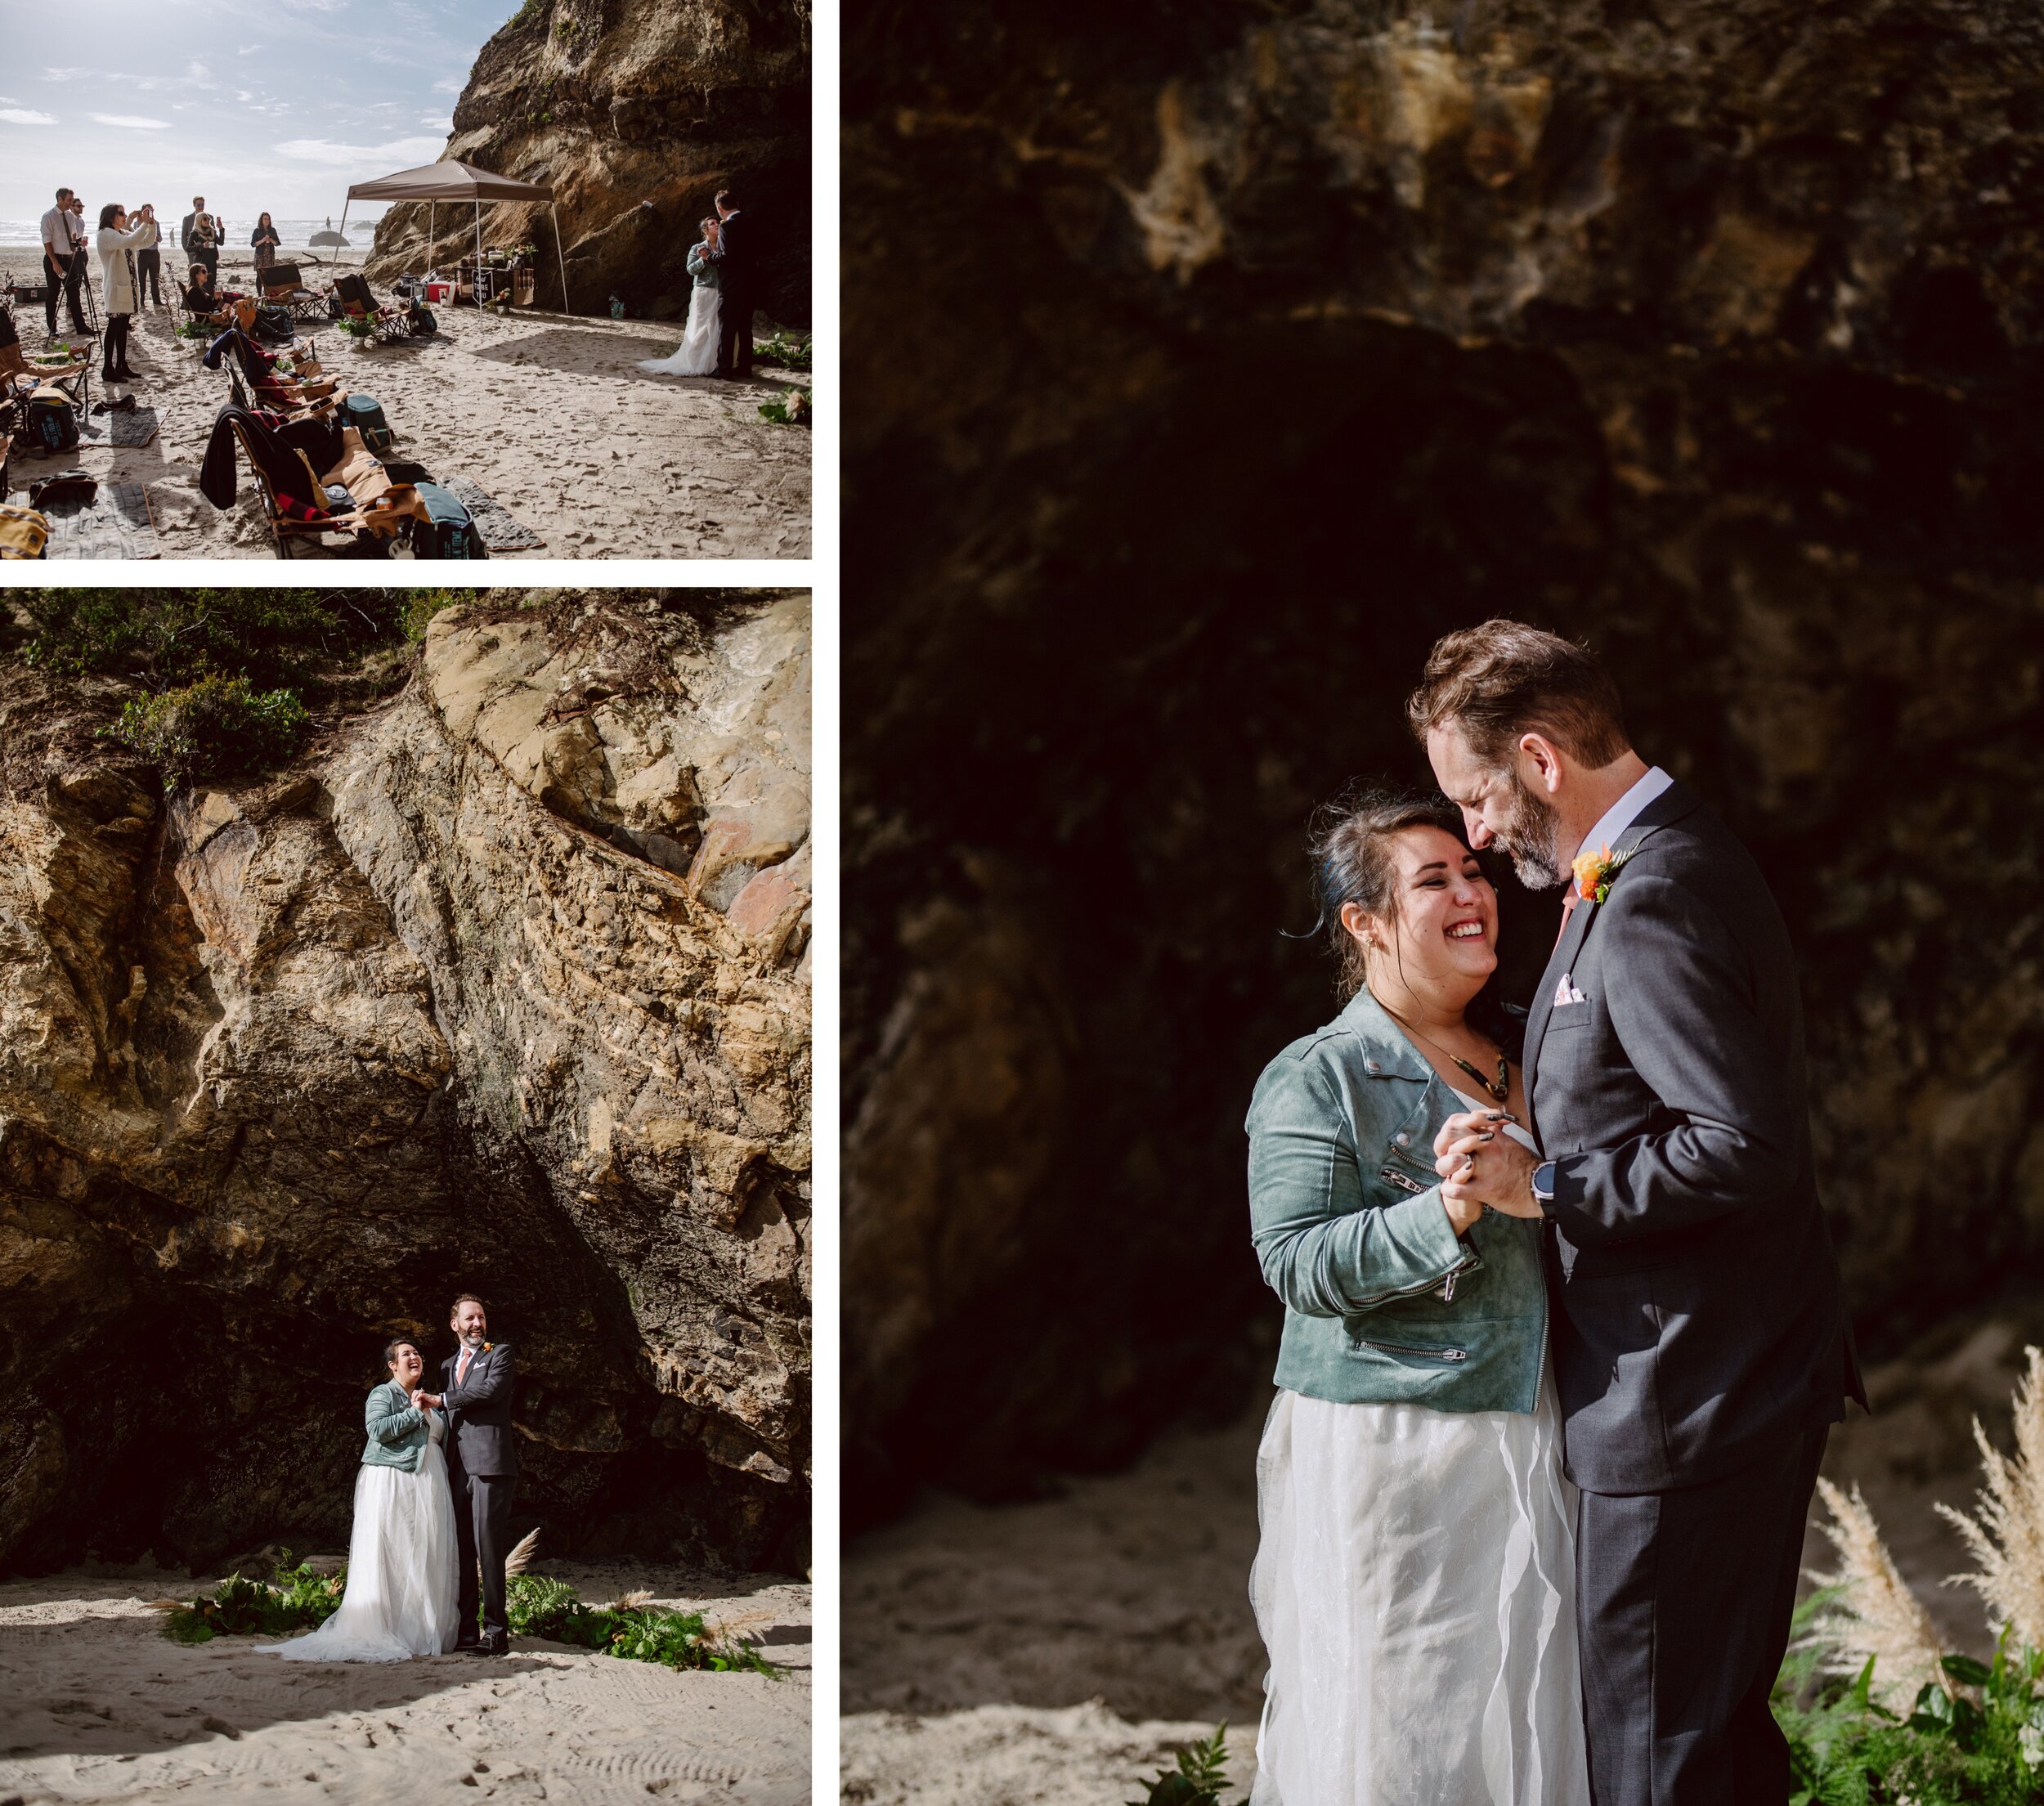 A bride and groom share a first dance on the beach at Hug Point after their elopement